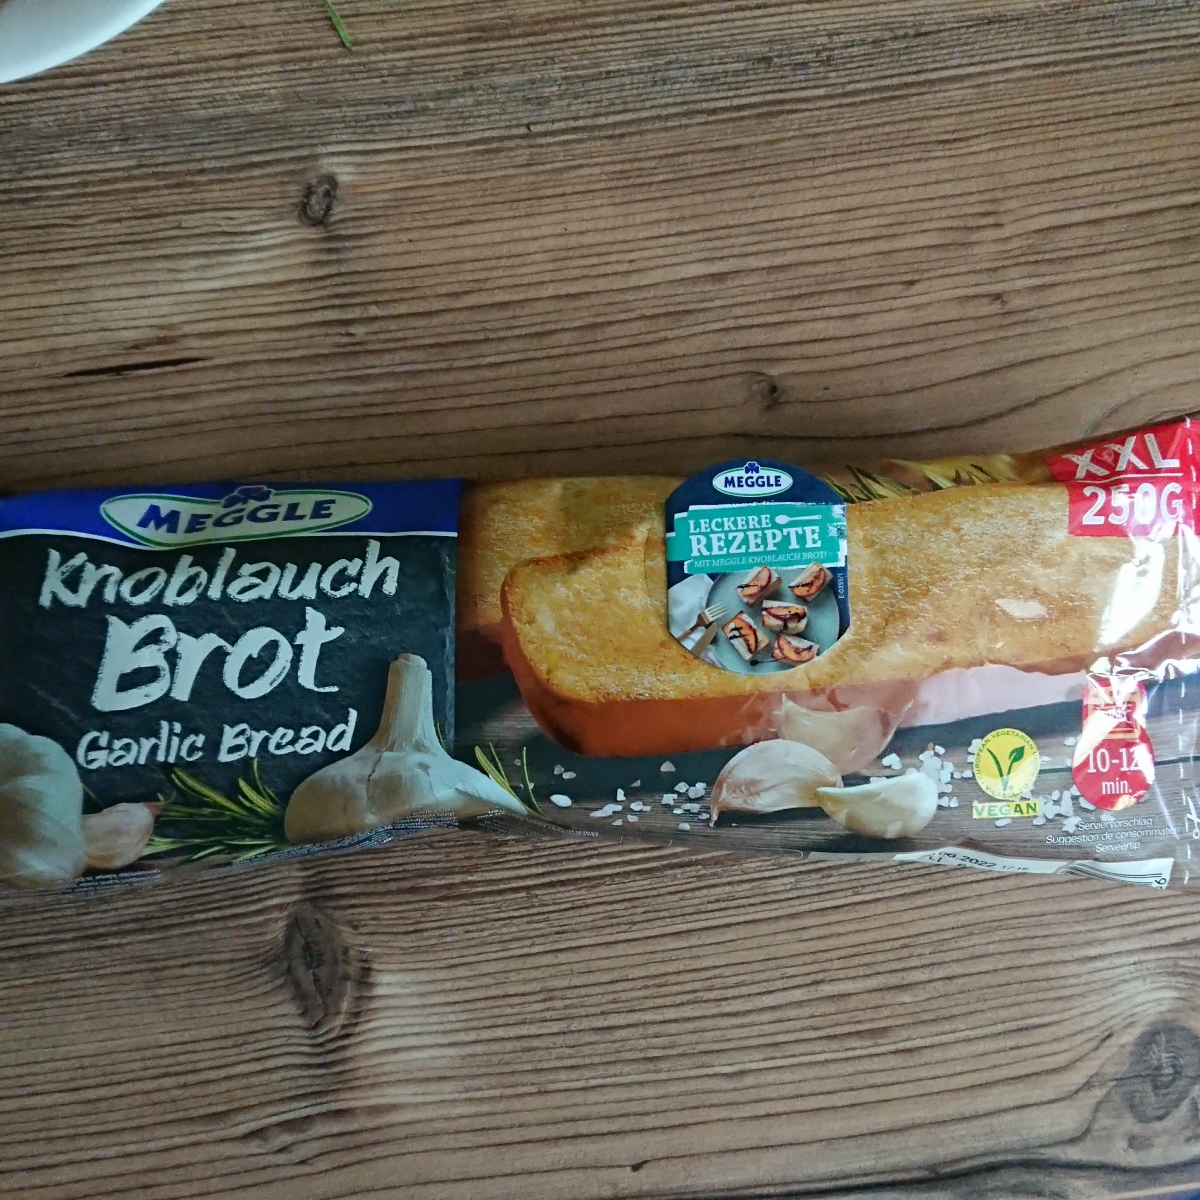 Meggle Knoblauch Brot Review | abillion